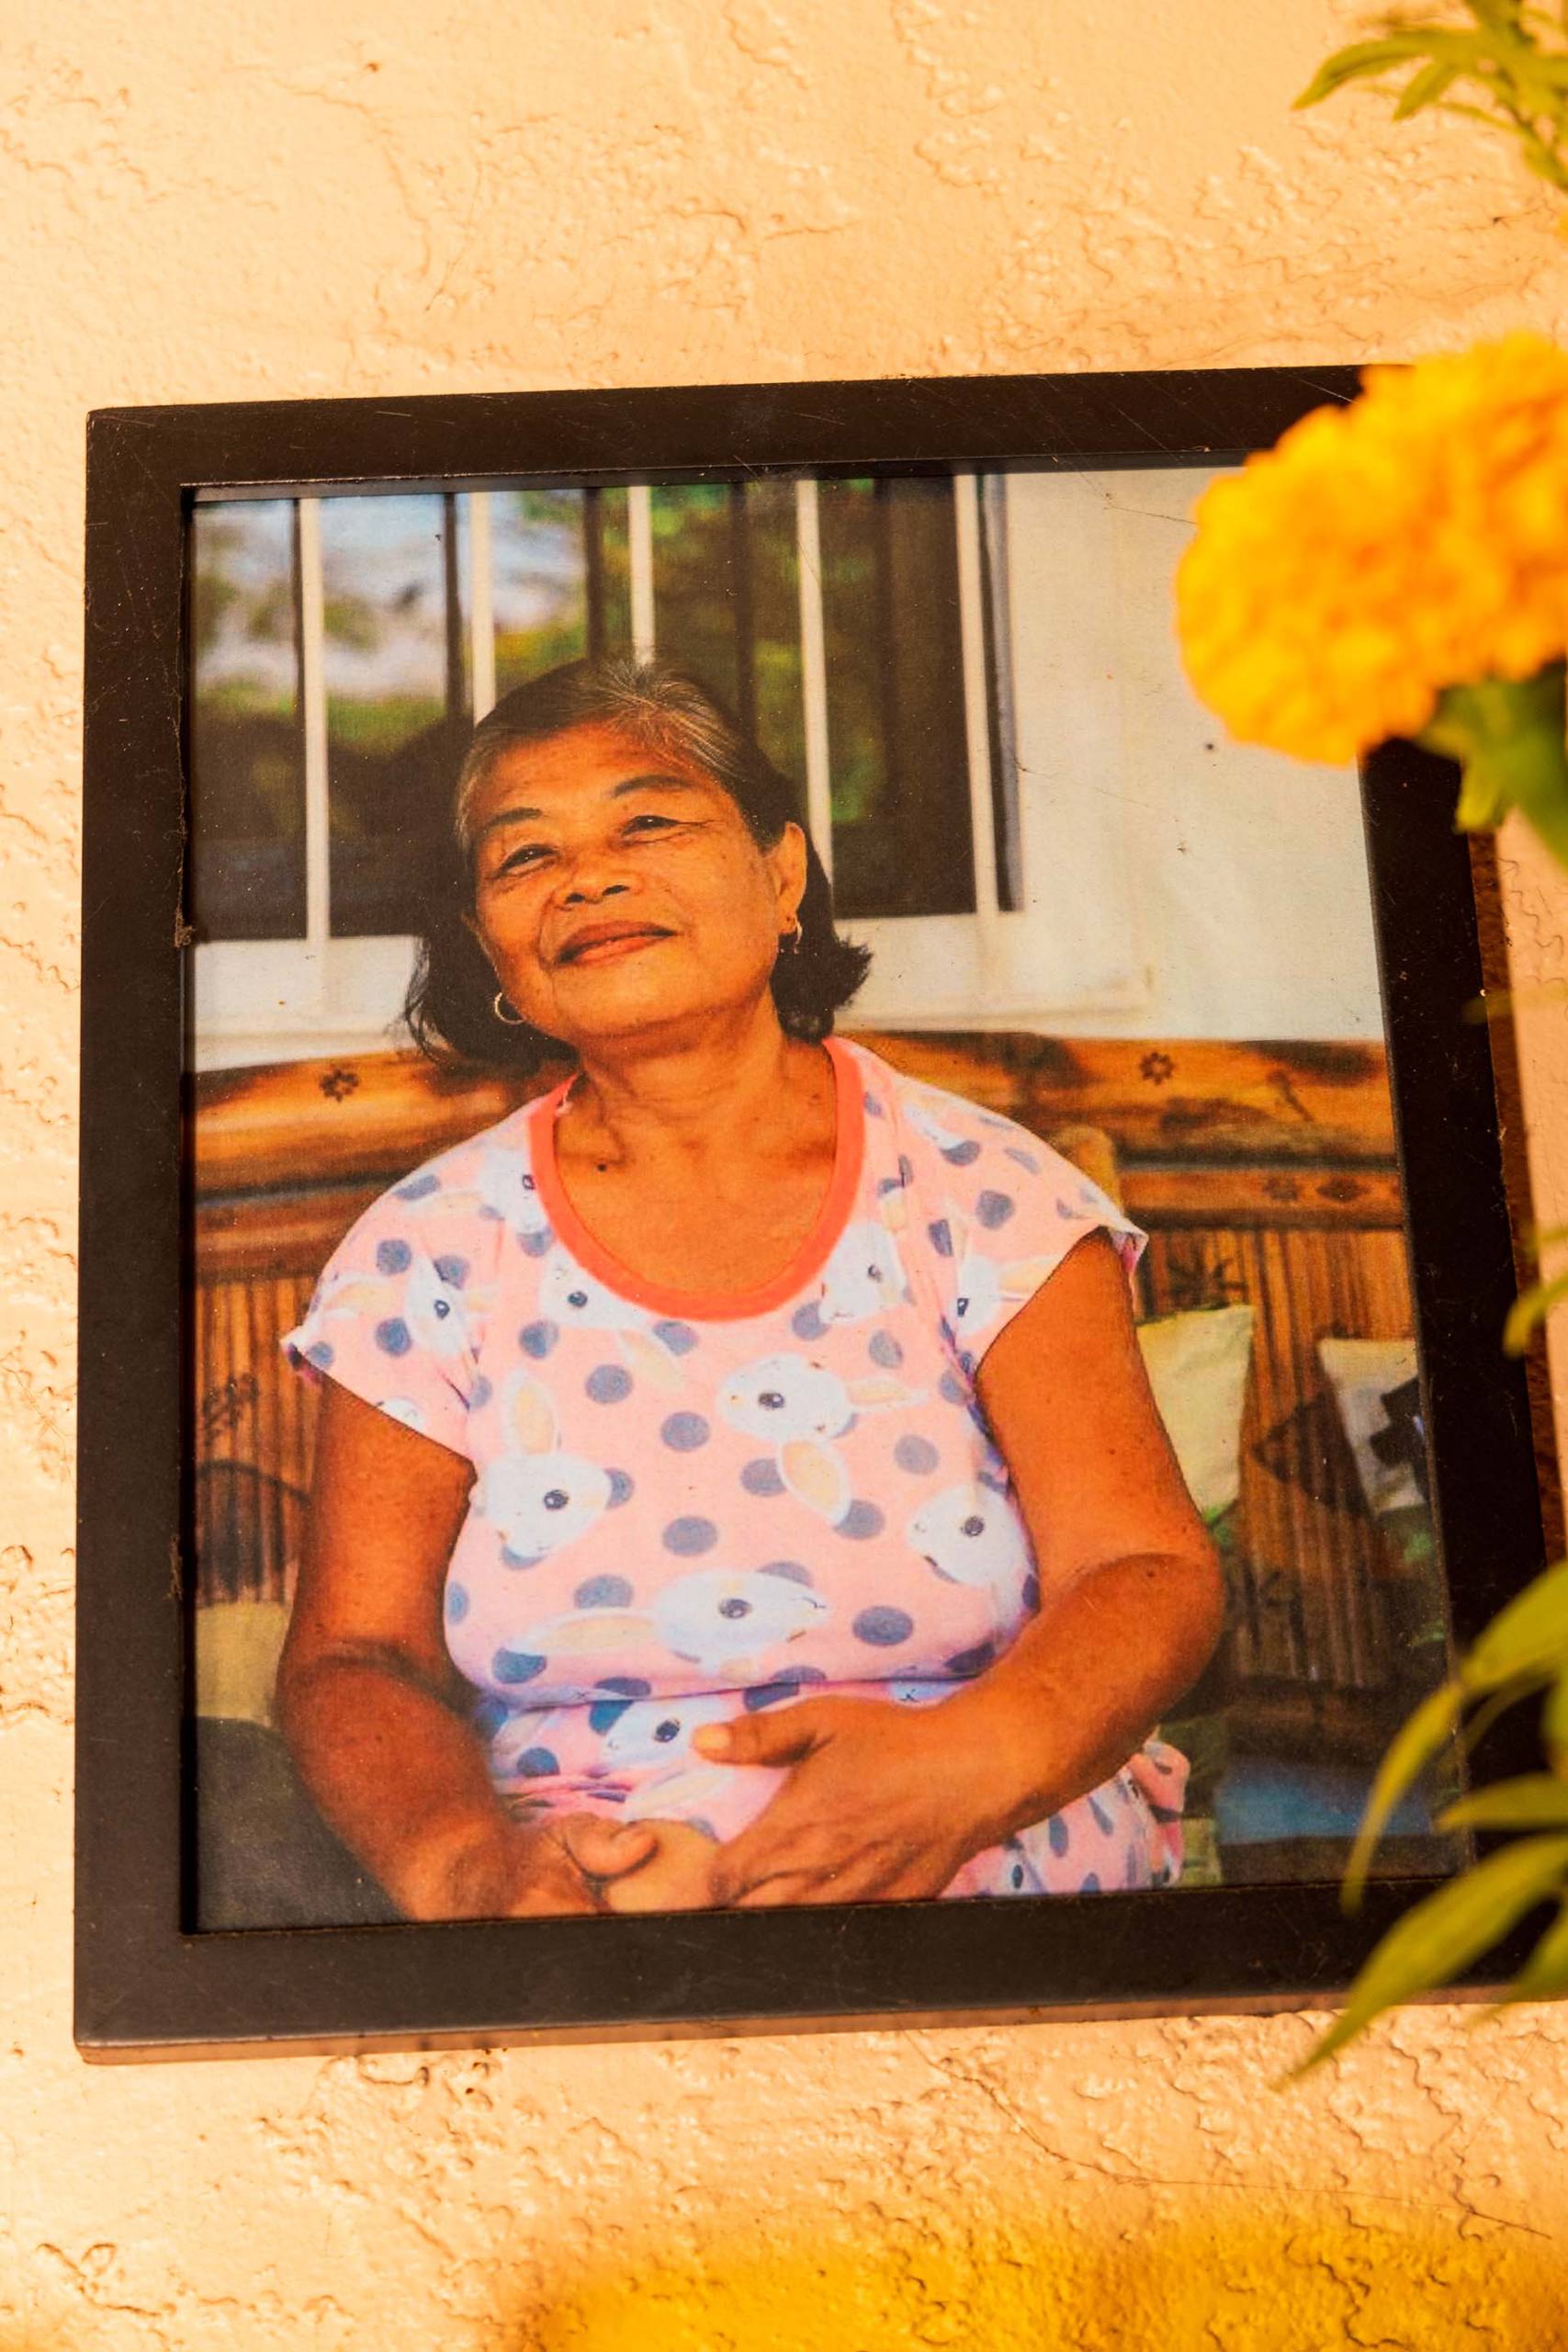 A framed photo of an older Filipino woman in a polka dotted blouse.